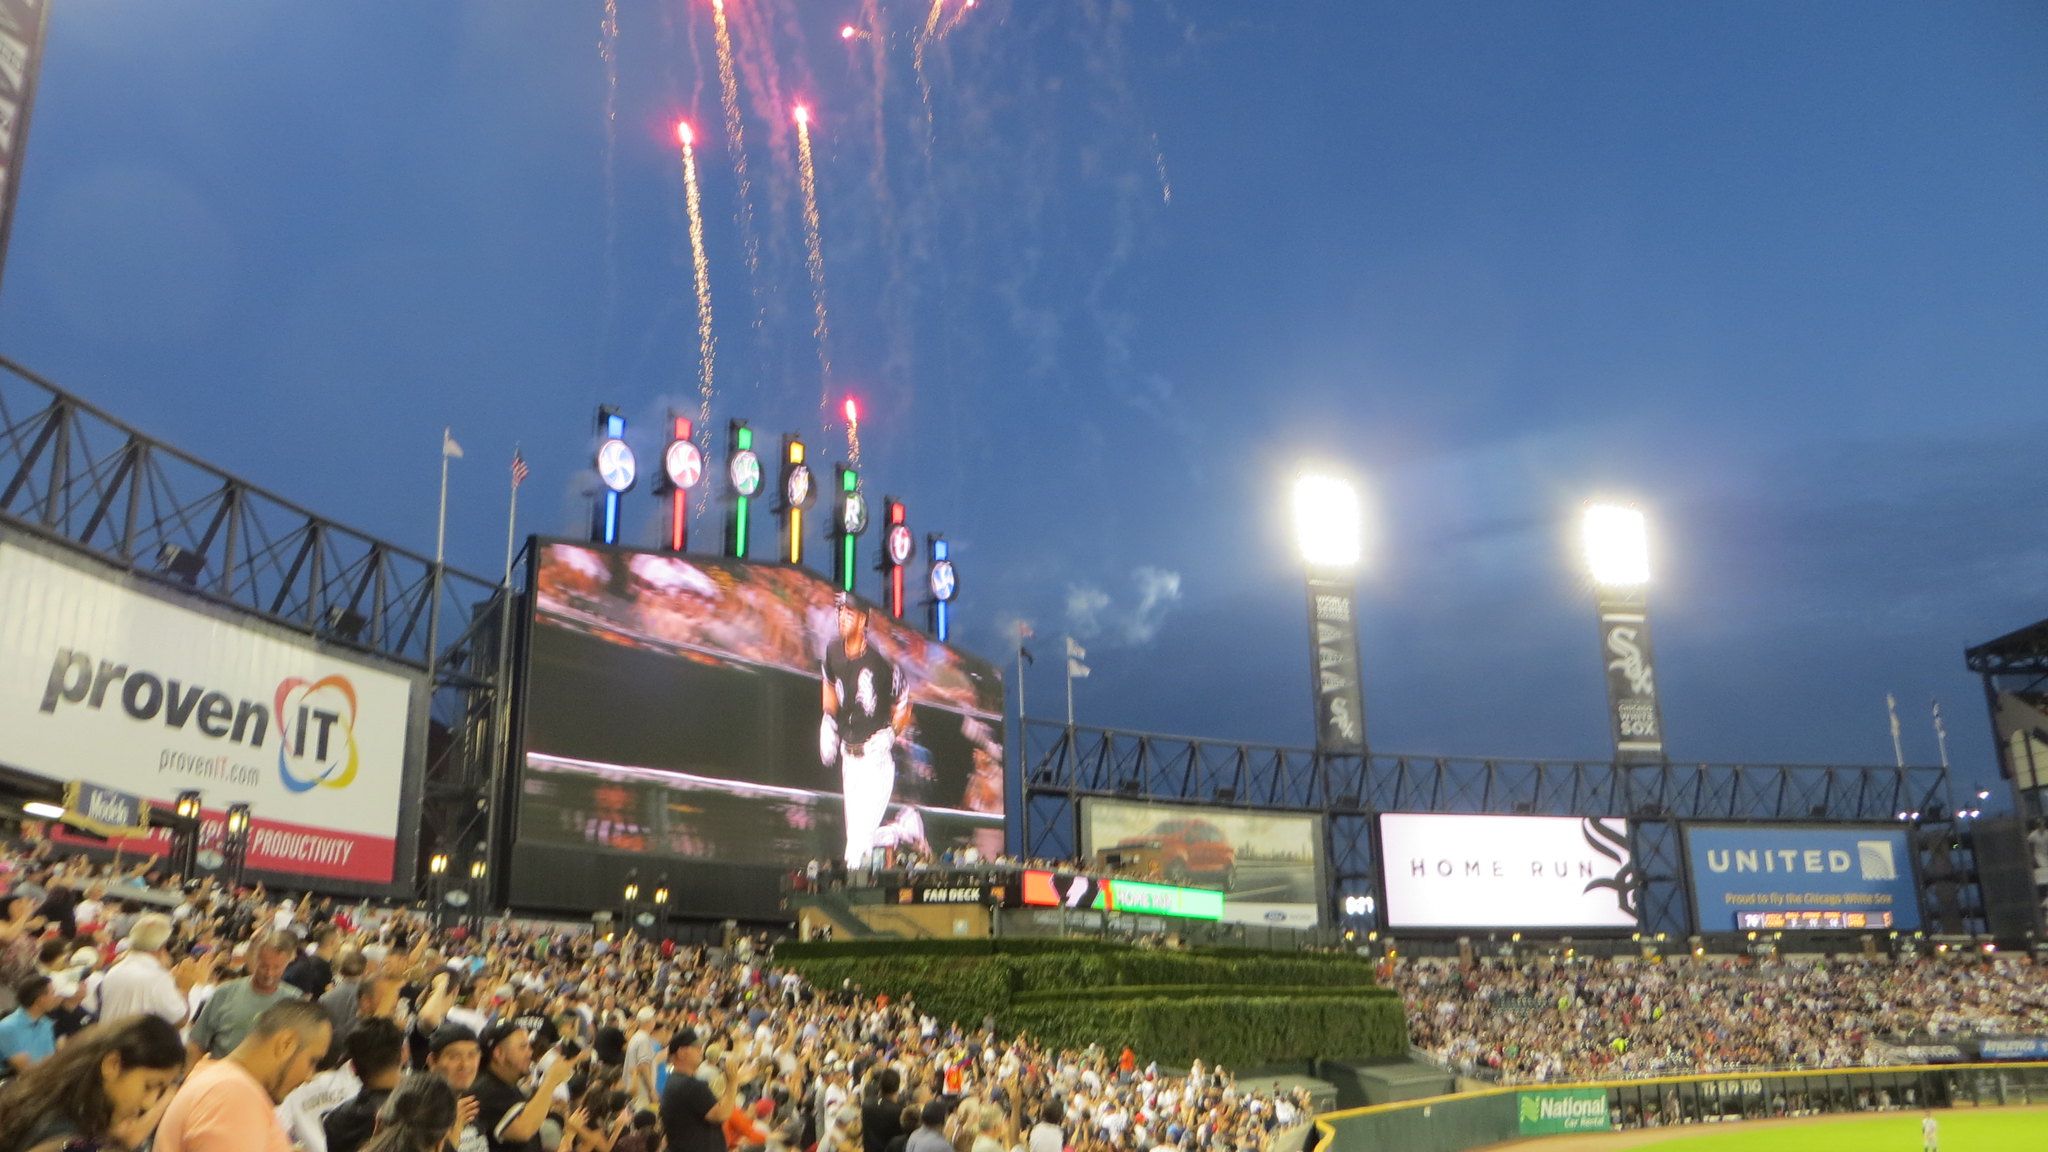 White Sox could leave Guaranteed Rate Field on Chicago's South Side